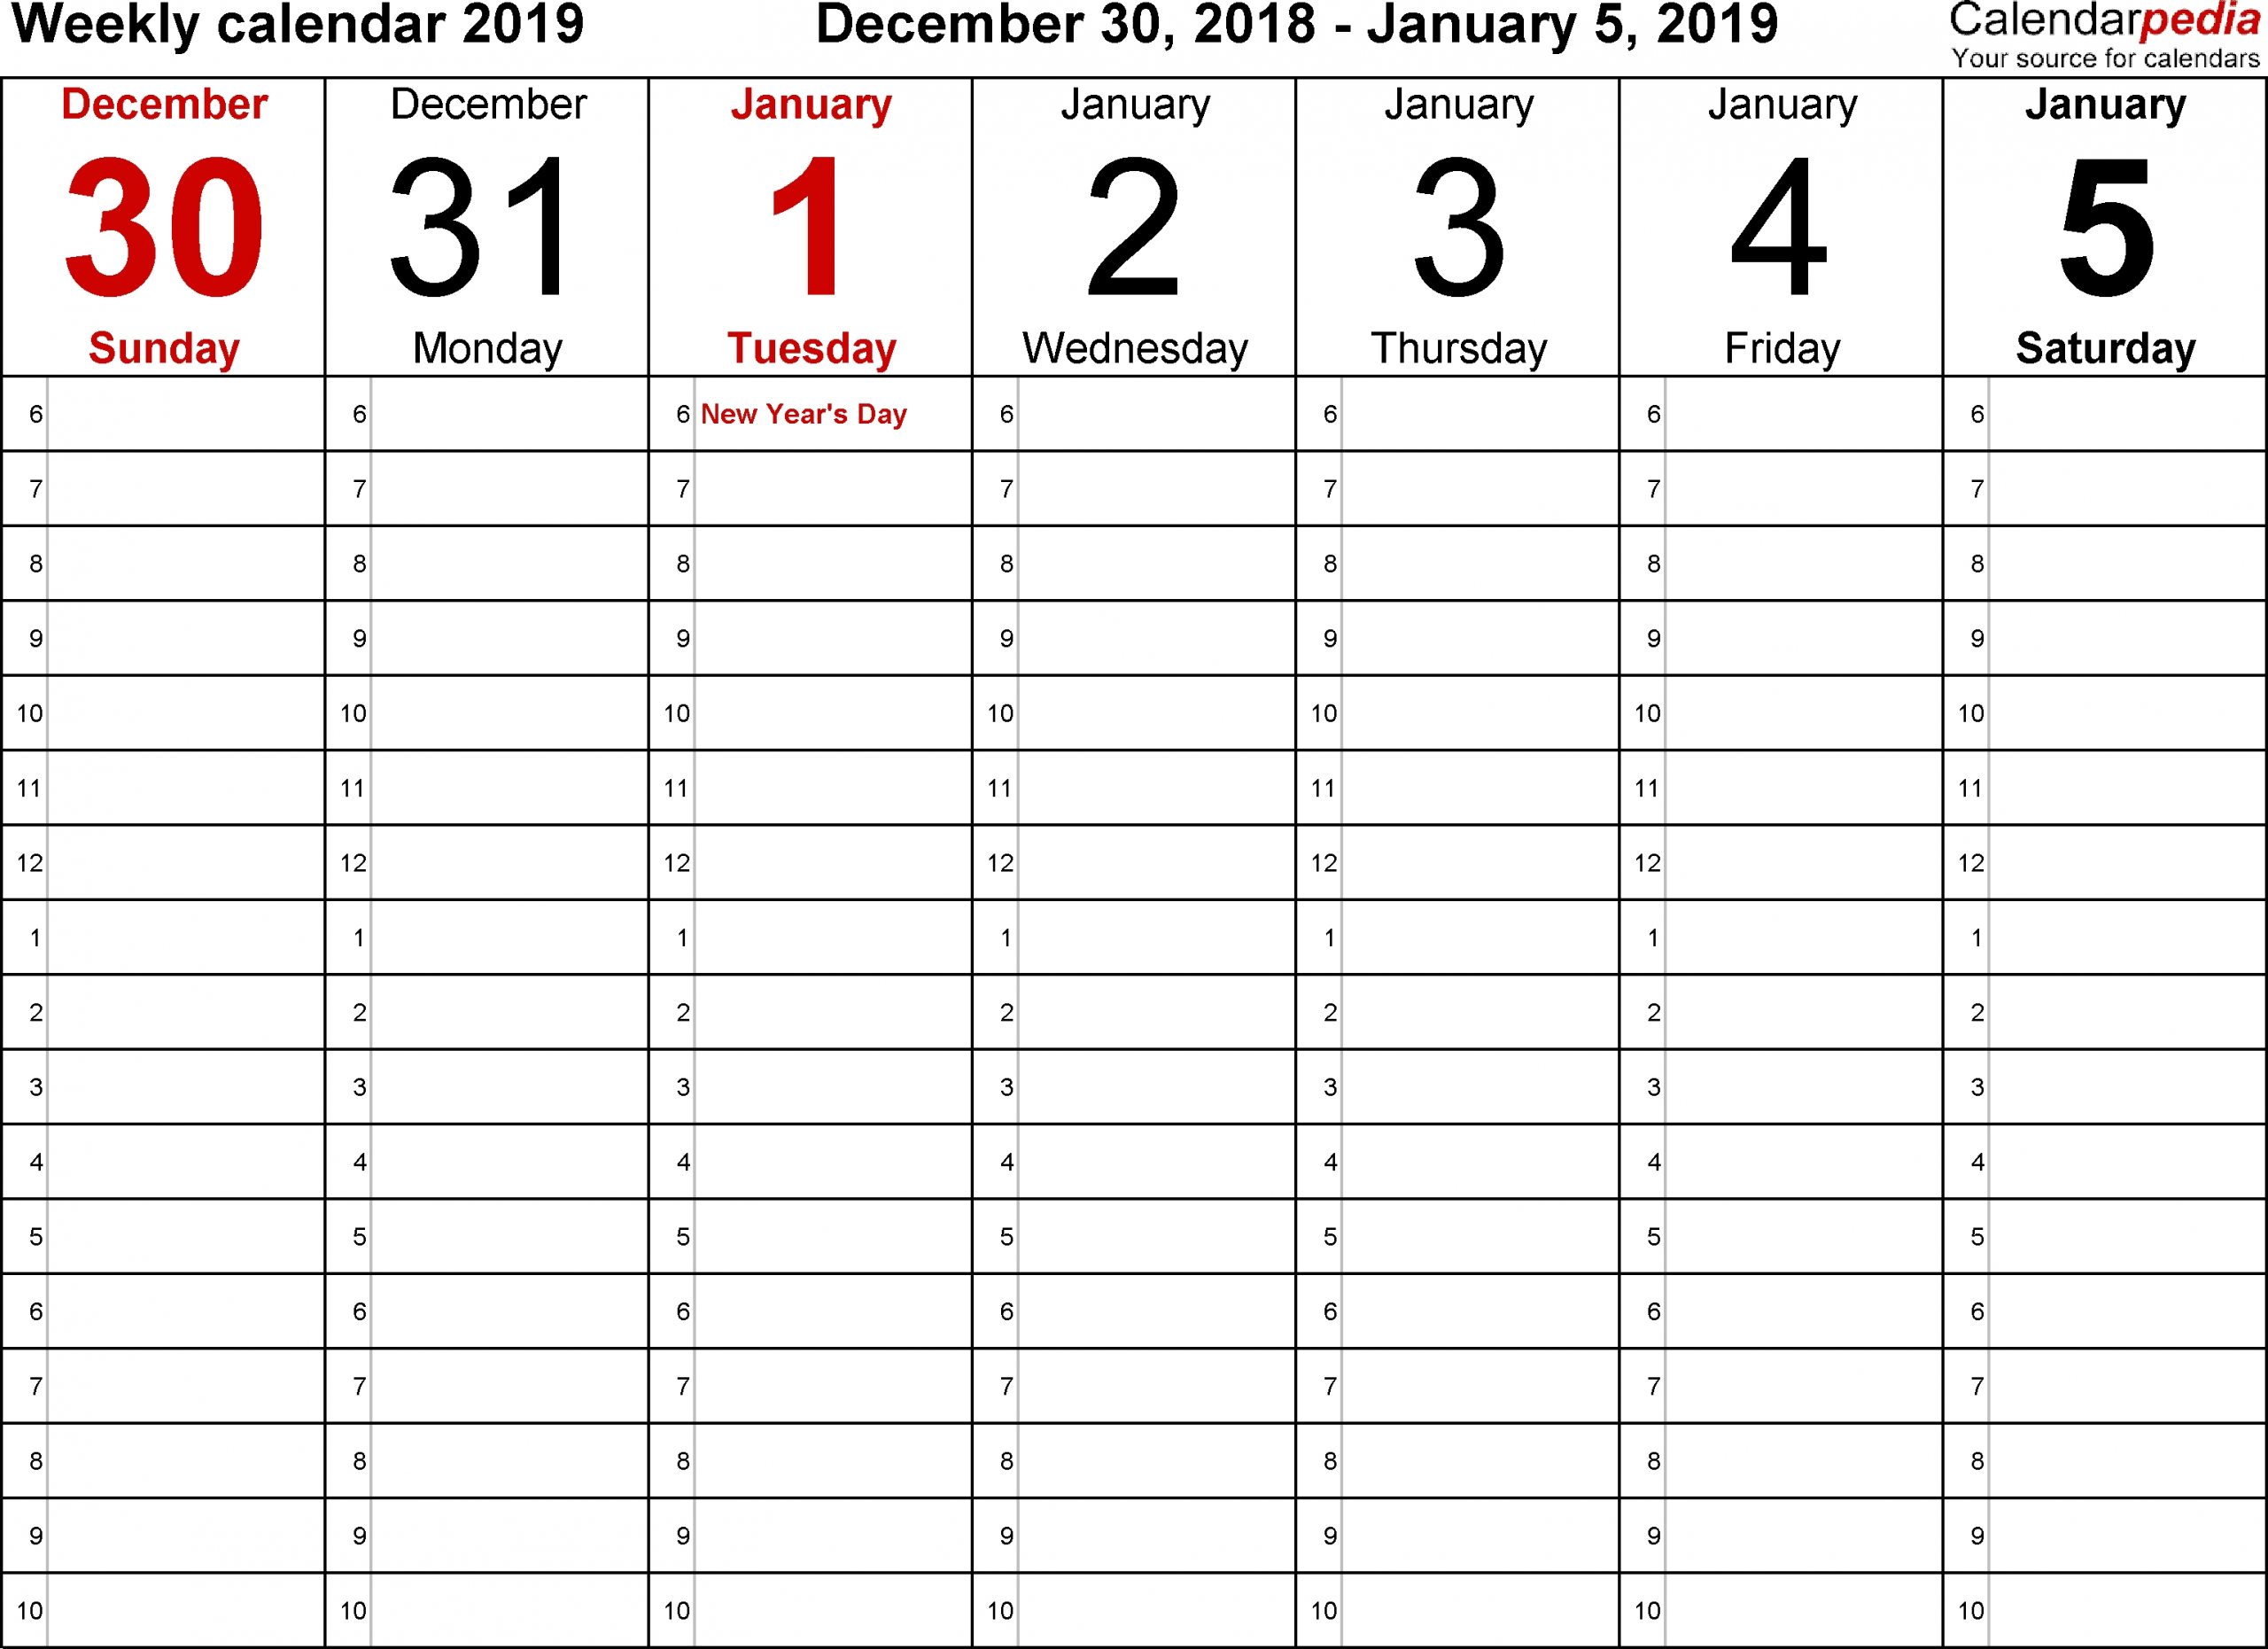 Weekly Calendar 2019 For Word - 12 Free Printable Templates throughout Type In And Printable Calendar With Hours